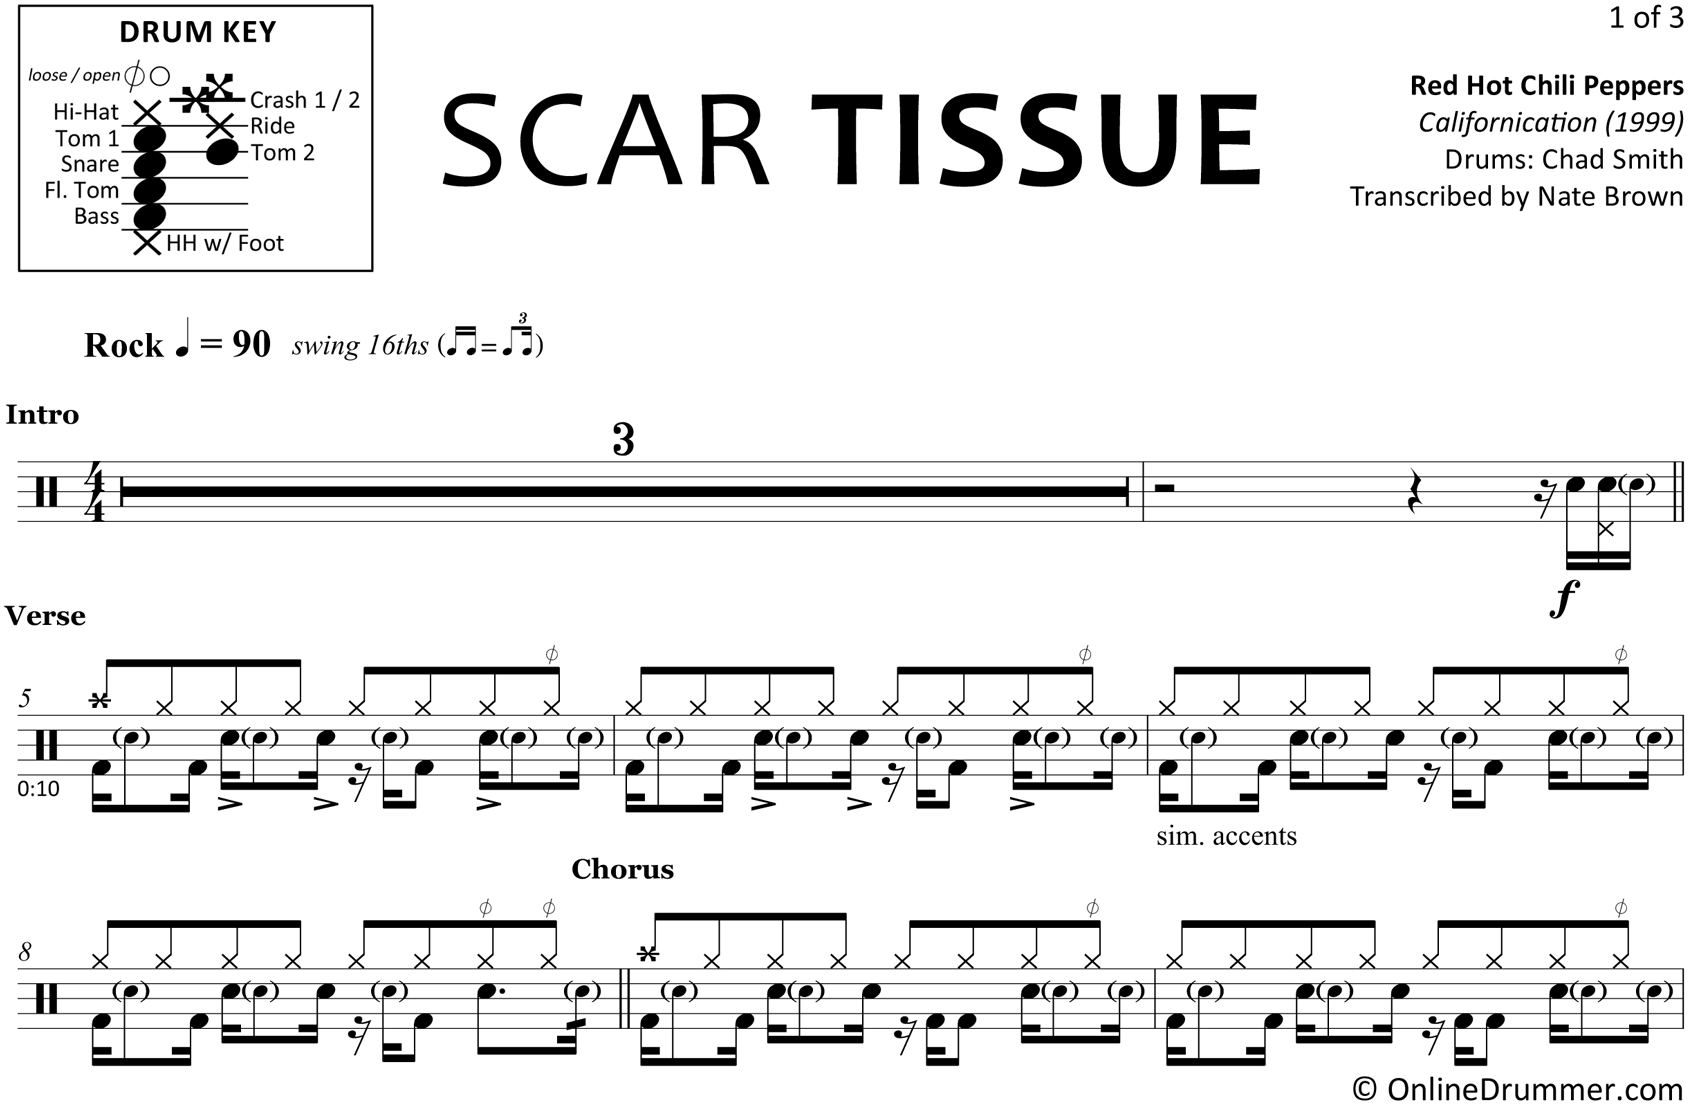 Scar Tissue - Red Hot Chili Peppers - Drum Sheet Music